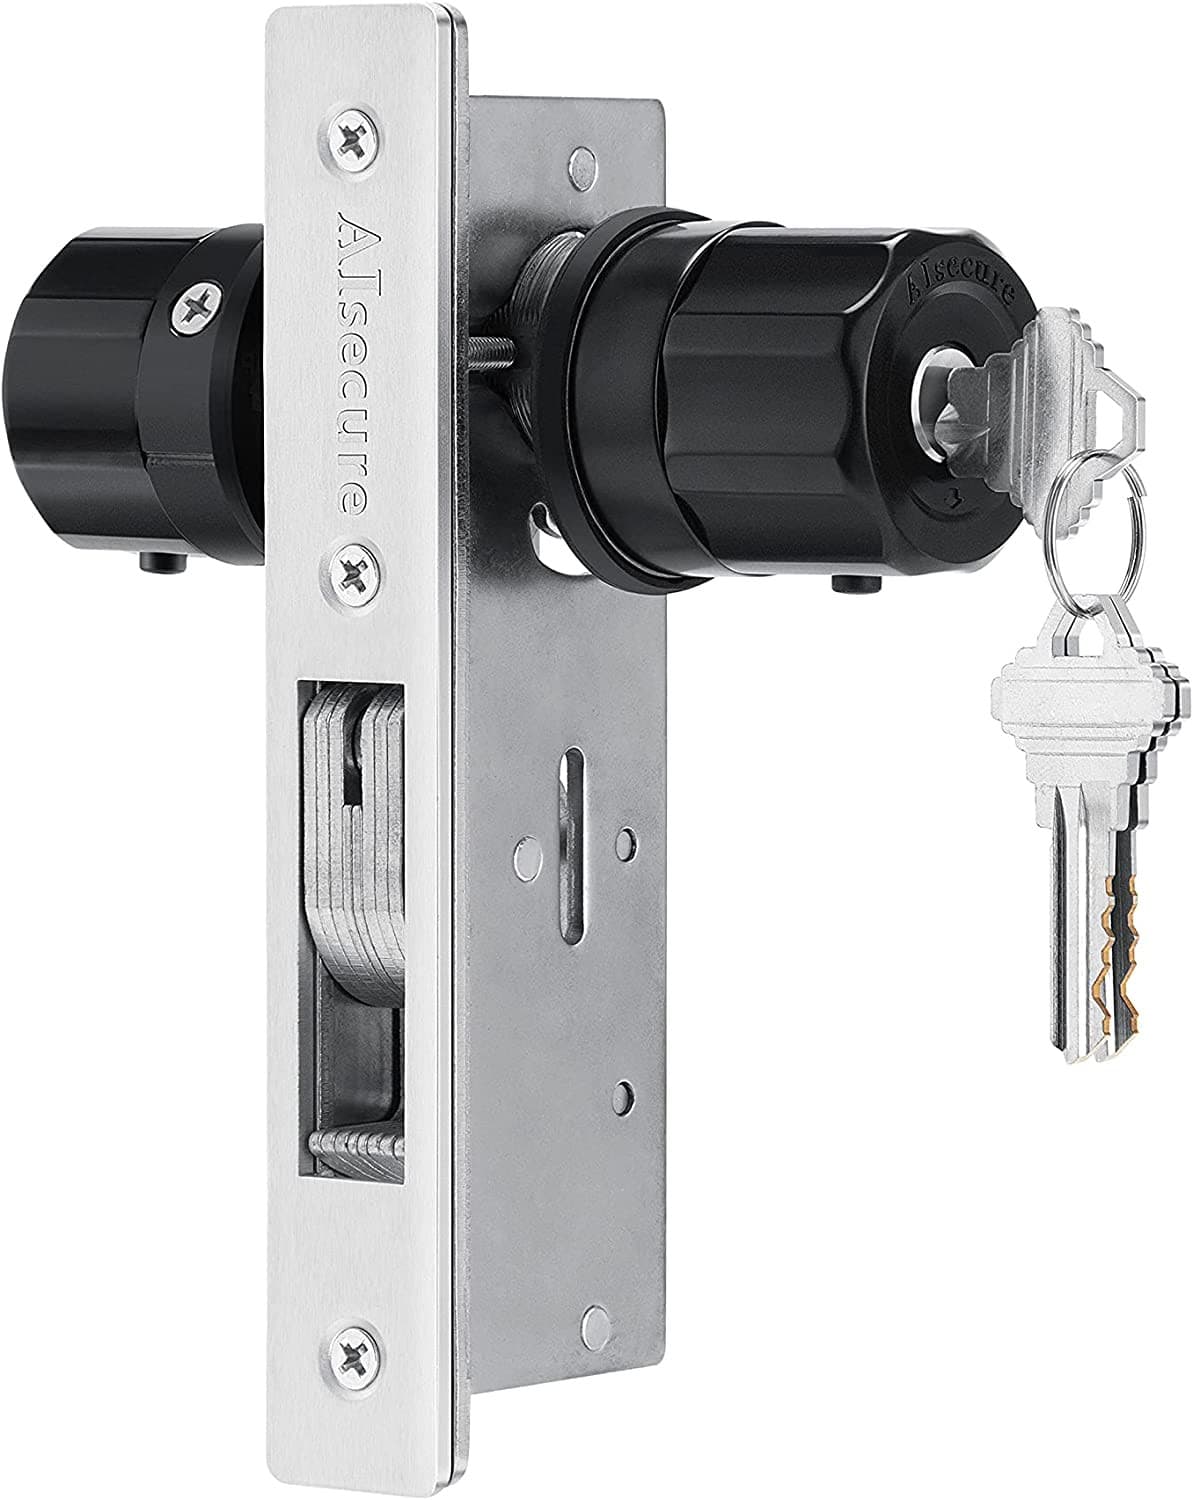 AIsecure Twist-to-Lock Storefront Door Lock Keyless with an Inaccessible Bypass Tool Open Commercial Door Lock Aluminum Mortise Lock with an Anti-Mislock Button,Black,Hookbolt,Backset 1.1/8"(29mm).